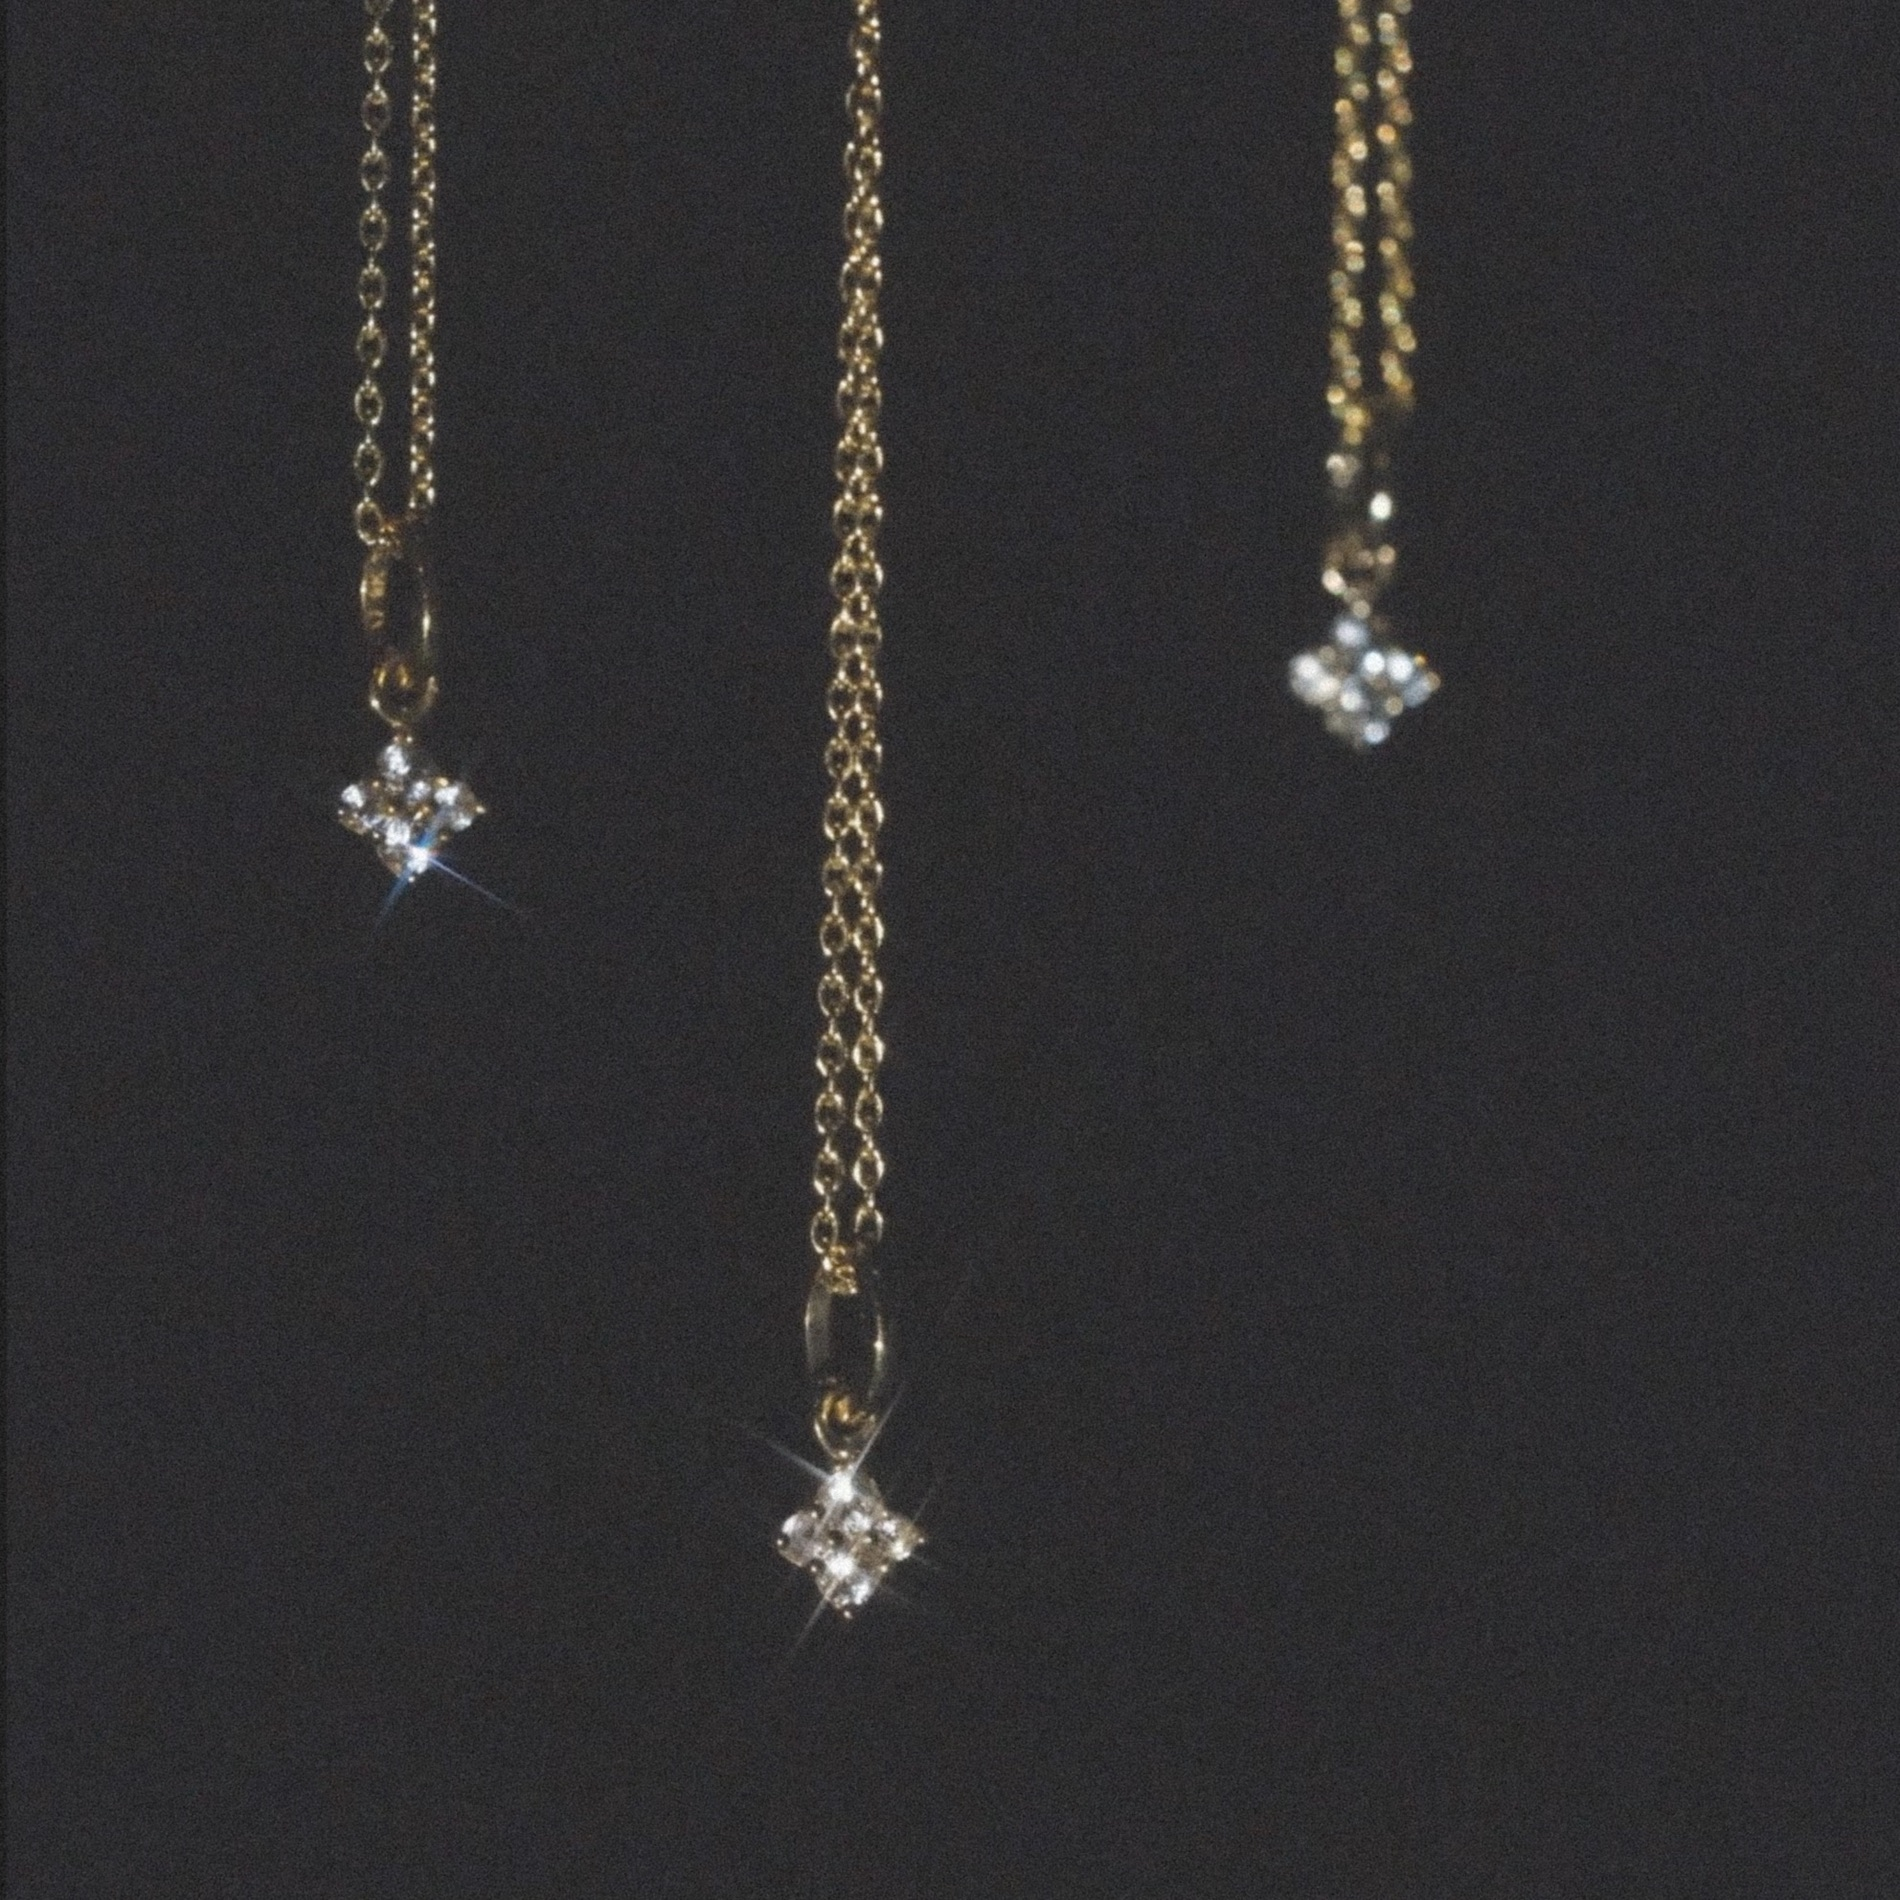 Aiden Jae's Stardust Charm Necklaces in yellow gold and white sapphire with cable chain hanging and sparkling in front on dark background.